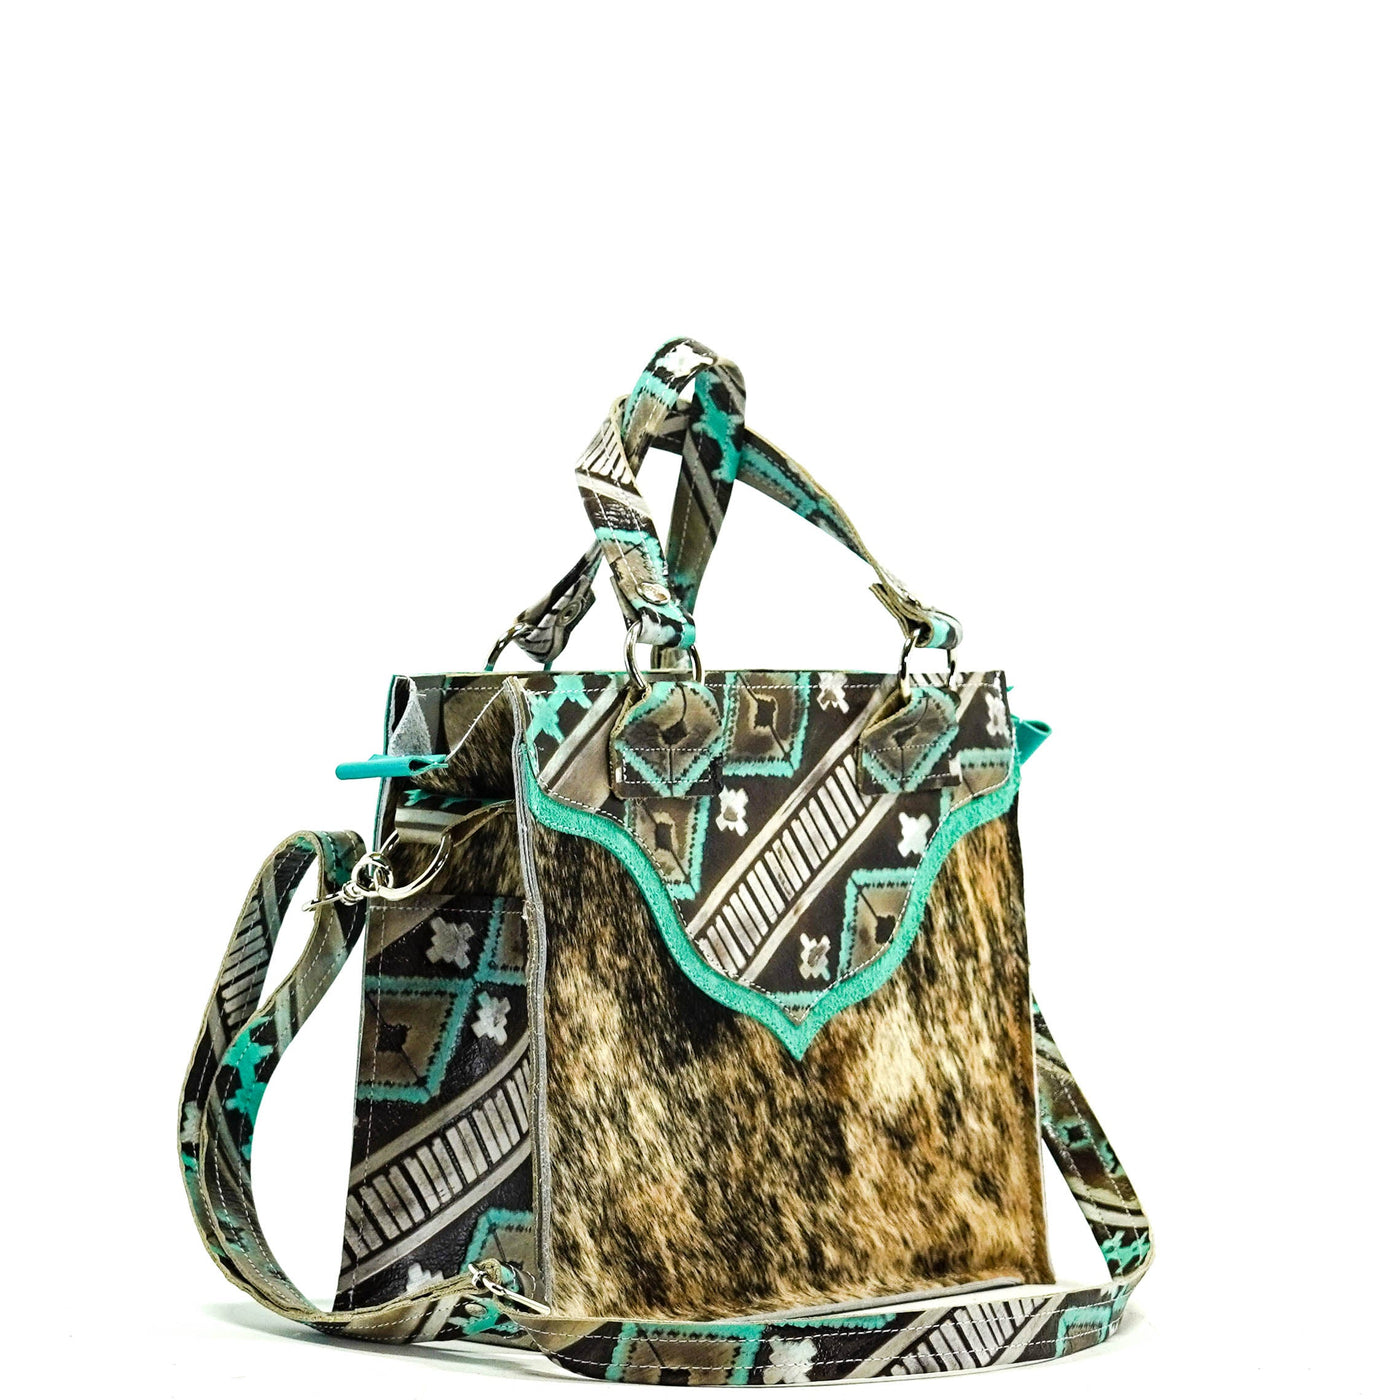 Minnie Pearl - Two-Tone Brindle w/ Cocoa Navajo-Minnie Pearl-Western-Cowhide-Bags-Handmade-Products-Gifts-Dancing Cactus Designs